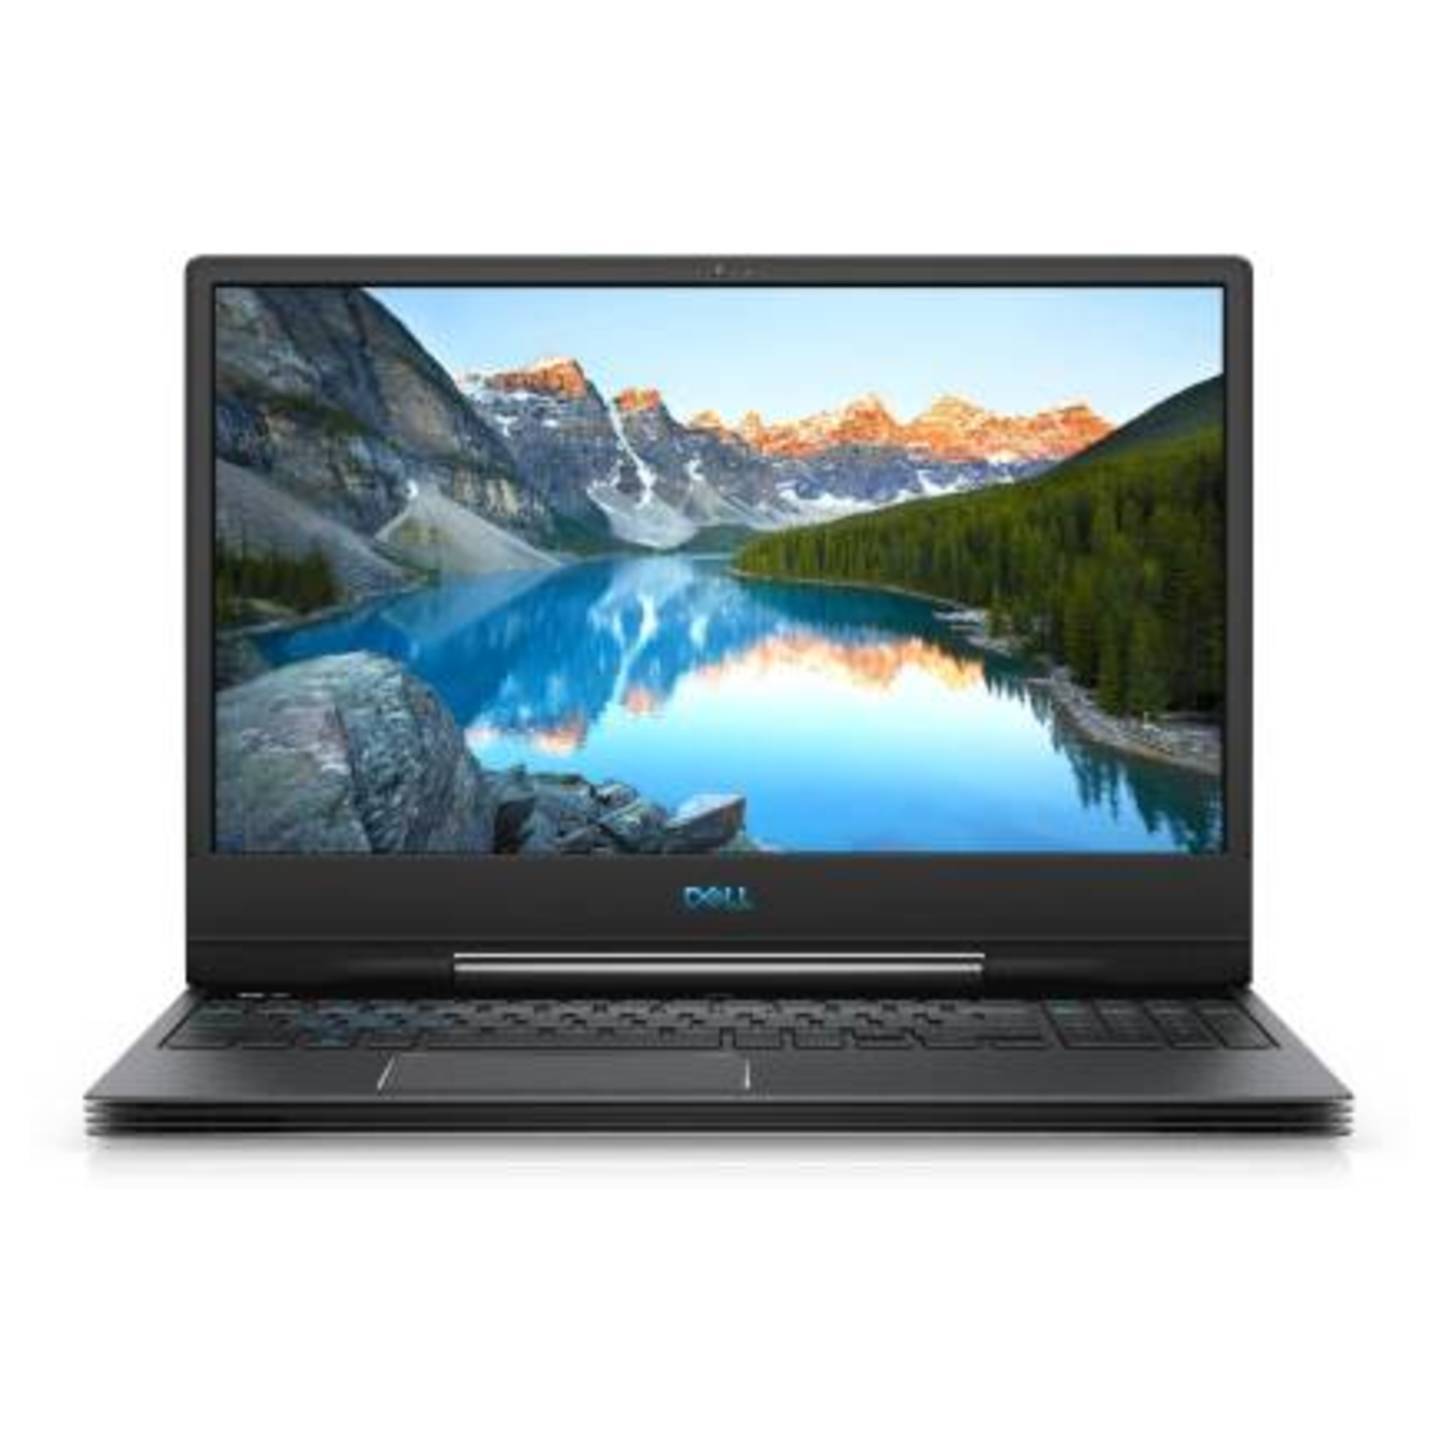 DELL Inspiron 7000 Core i7 9th Gen - 16 GB1 TB HDD512 GB SSDWindows 10 Home8 GB GraphicsNVIDIA GeForce RTX 2070 INS 7590 Gaming Laptop  15.6 inch, Abyss Grey, 2.5 kg, With MS Office